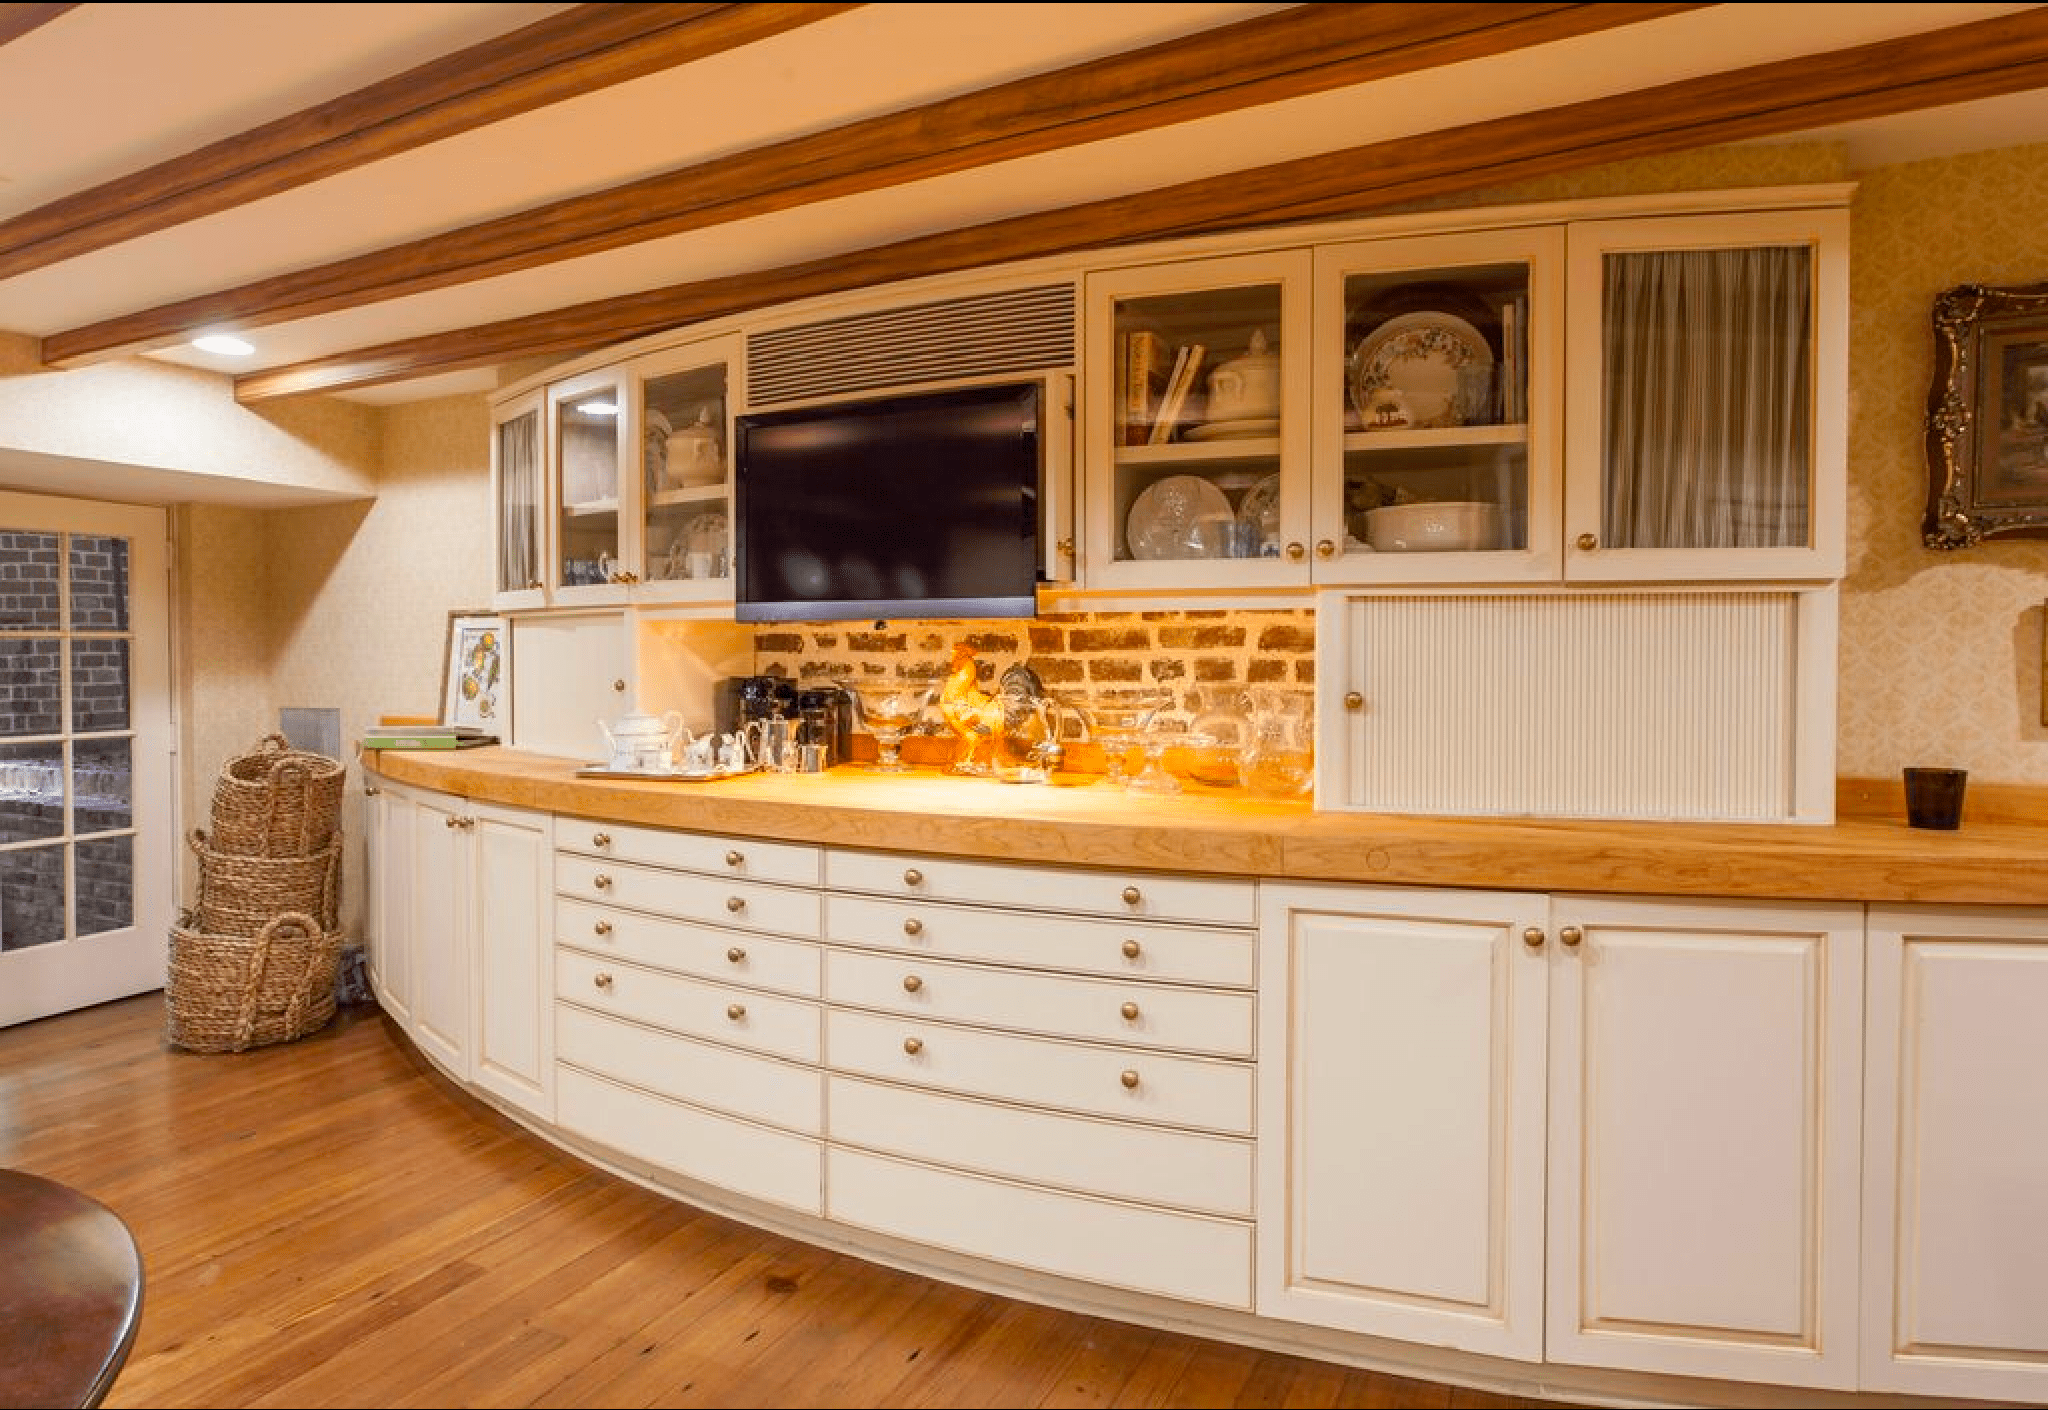 Curved kitchen cabinets in historic home